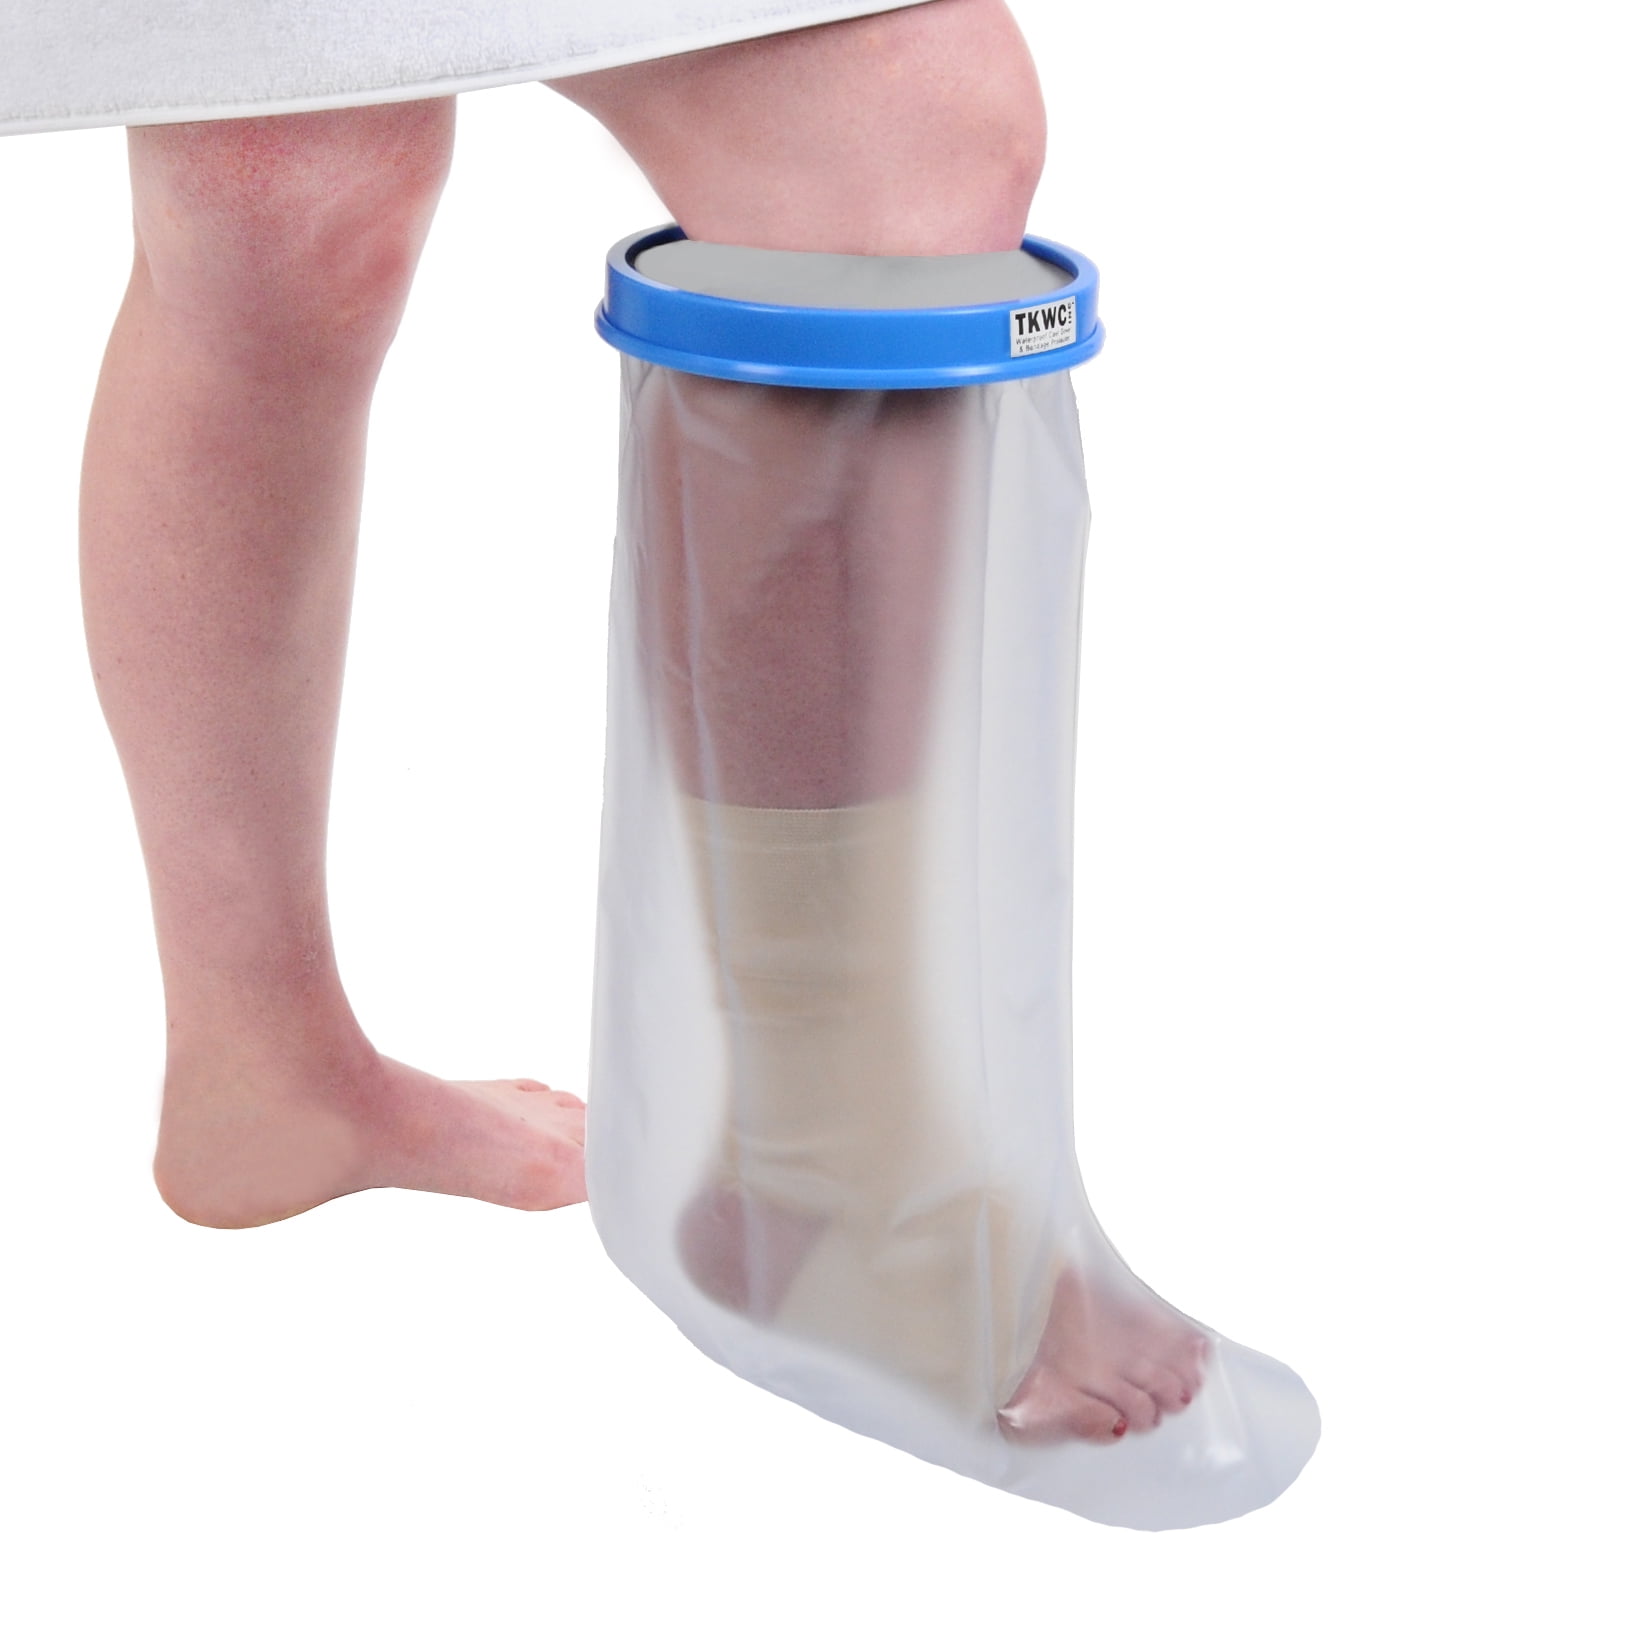 TKWC INC Waterproof Leg Cast Cover for Shower 5738 Watertight Foot Protector